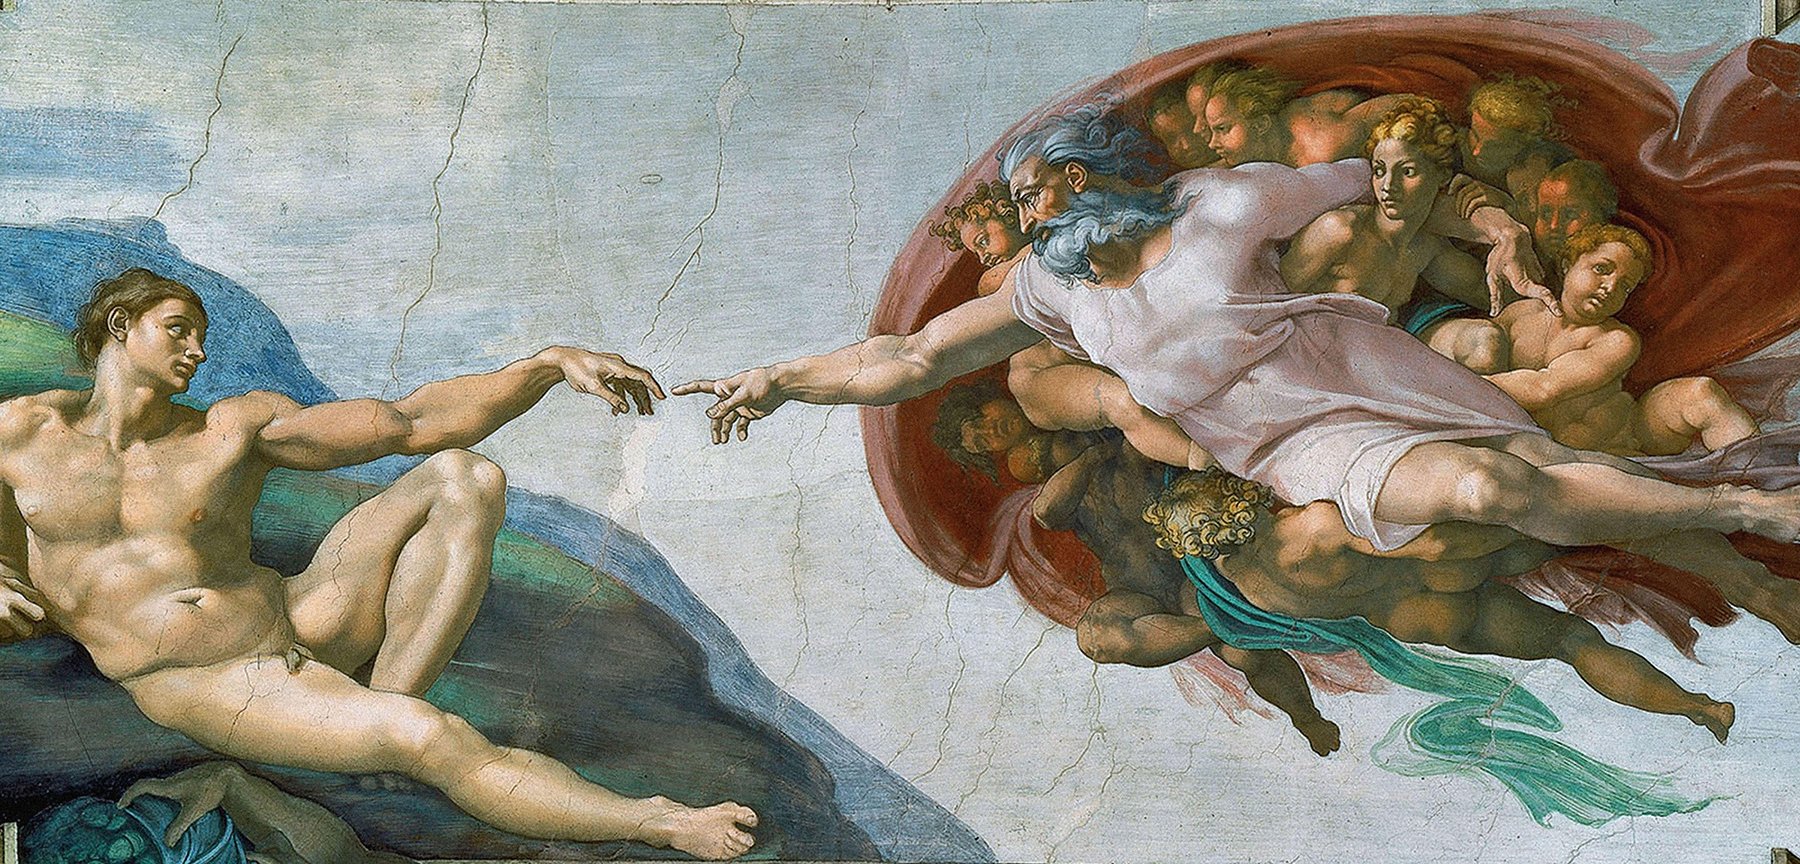 &quot;The Creation of Adam&quot; by Michelangelo, created at the height of the Renaissance in 1512